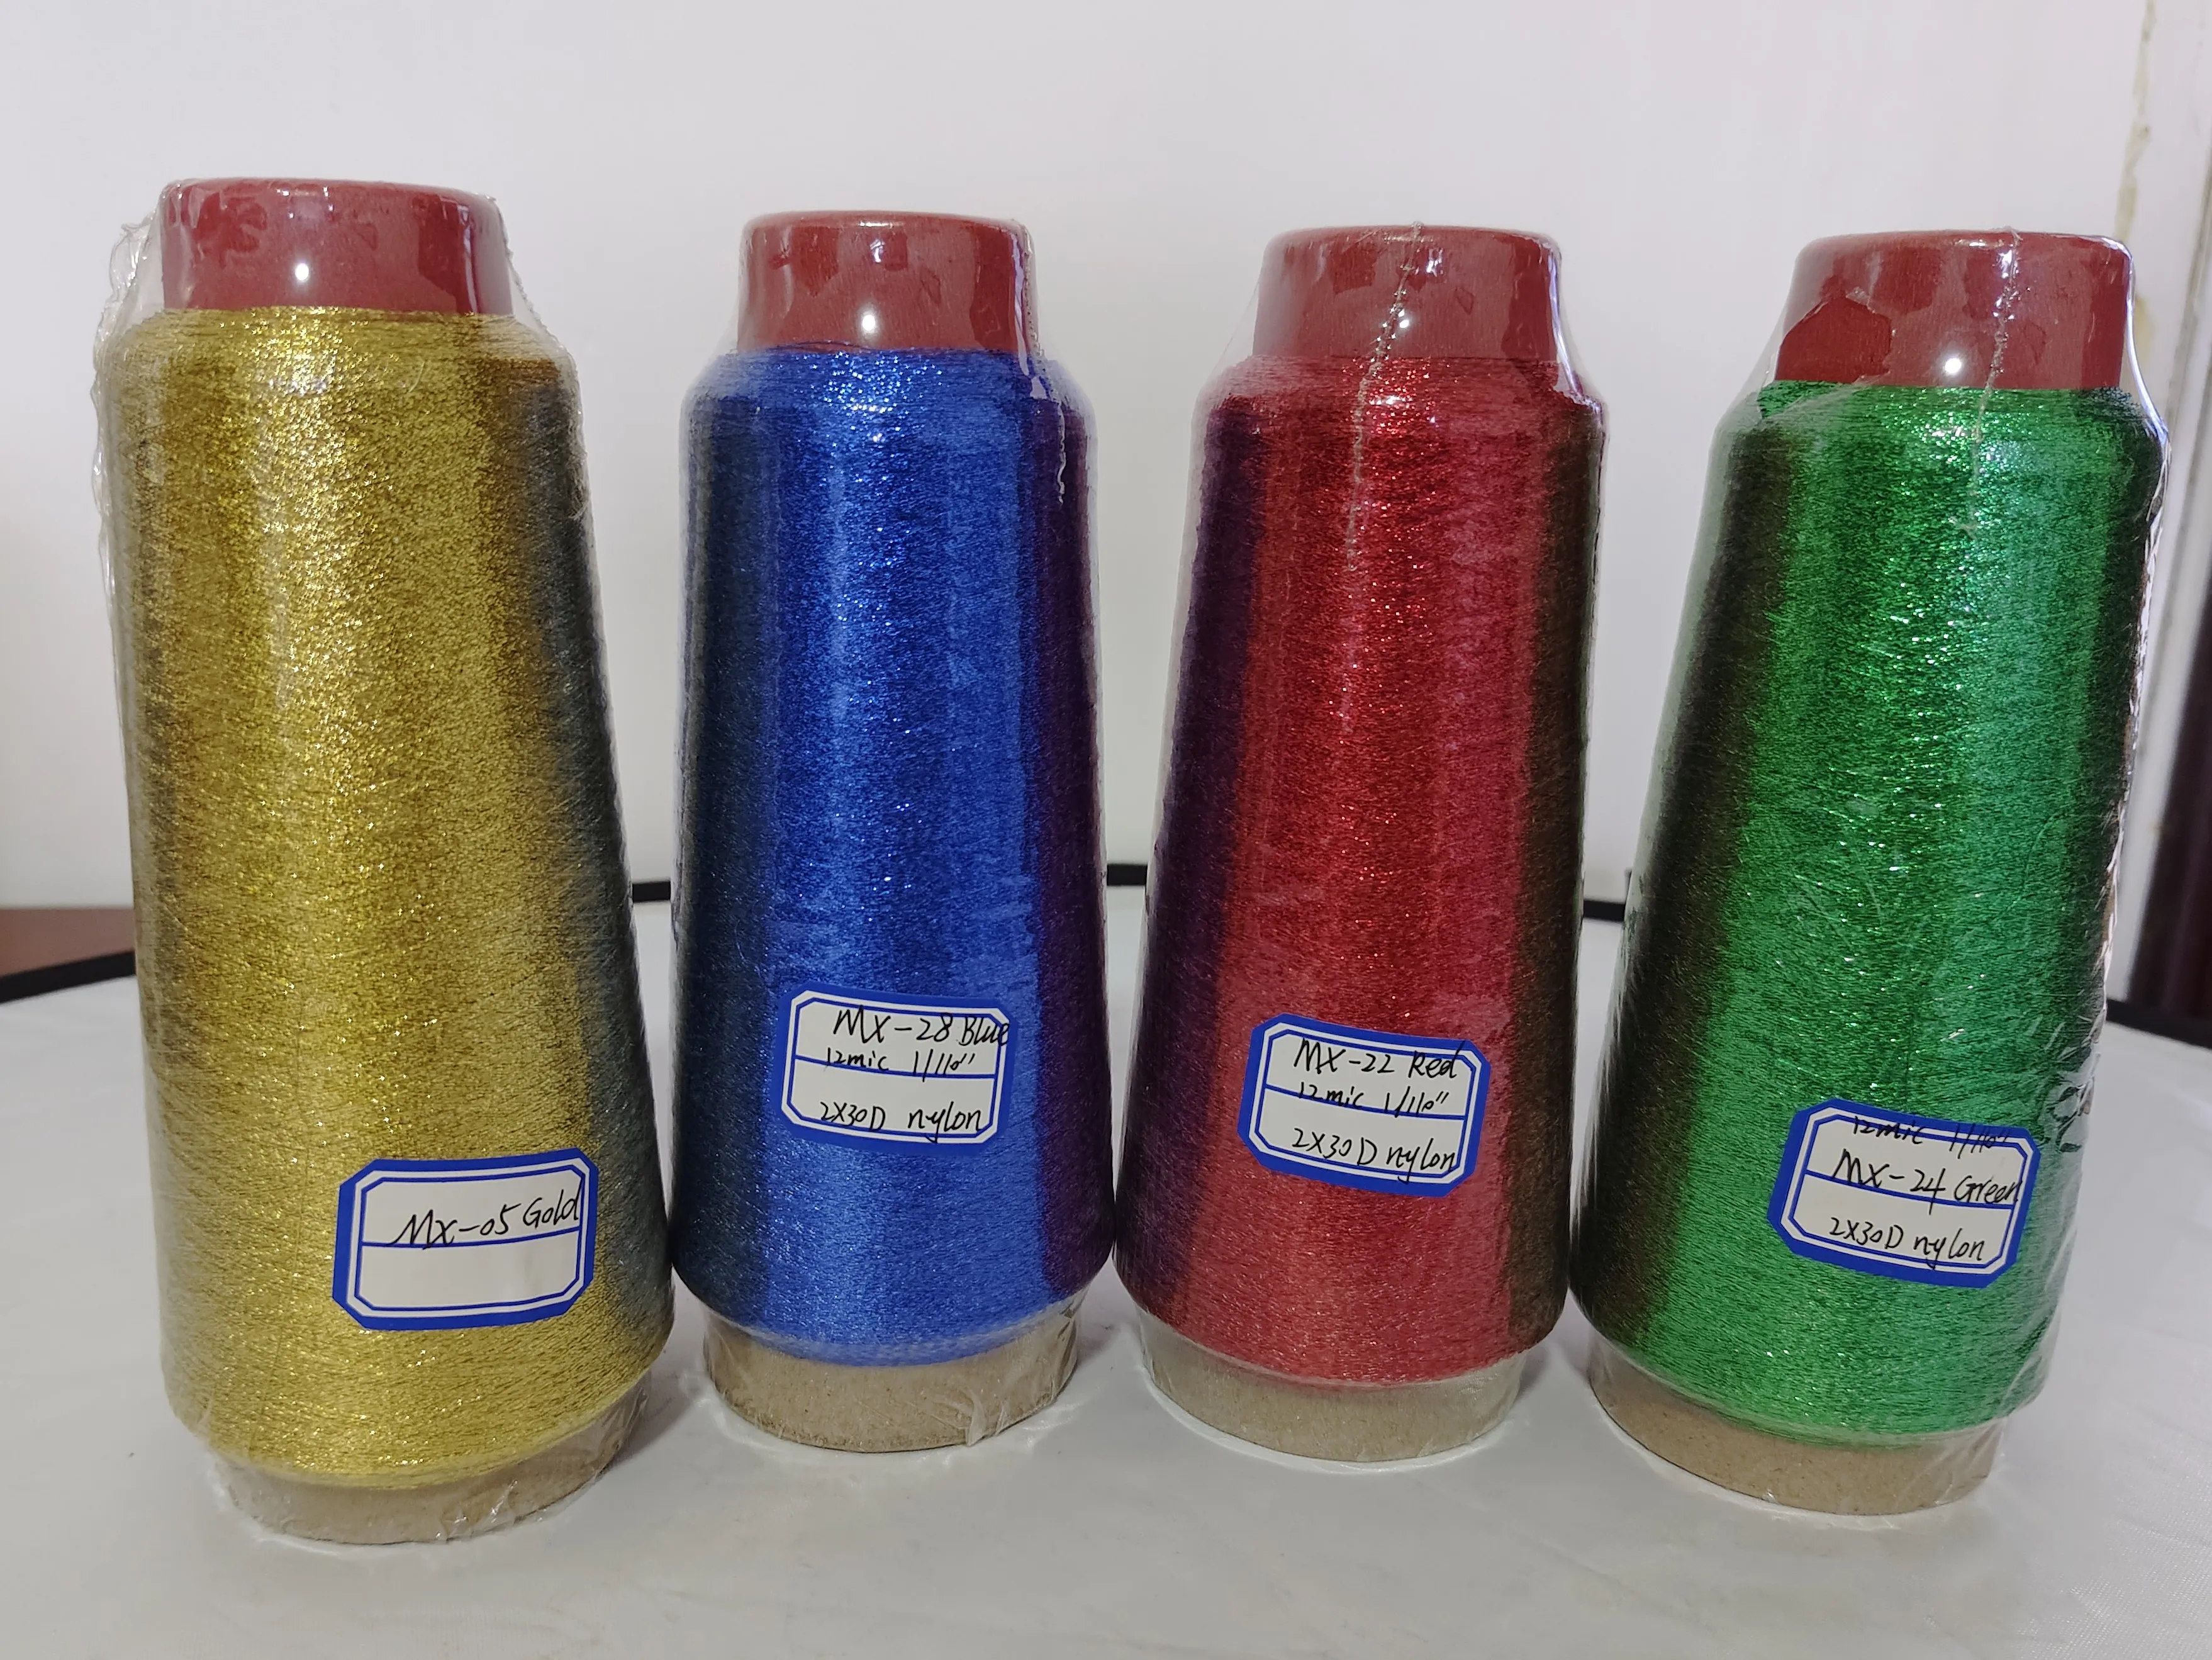 High-Quality MX-Type Metallic Yarn Manufacturer  Multi color Metal yarn Thread for Weaving 12mic 2*30D polyester